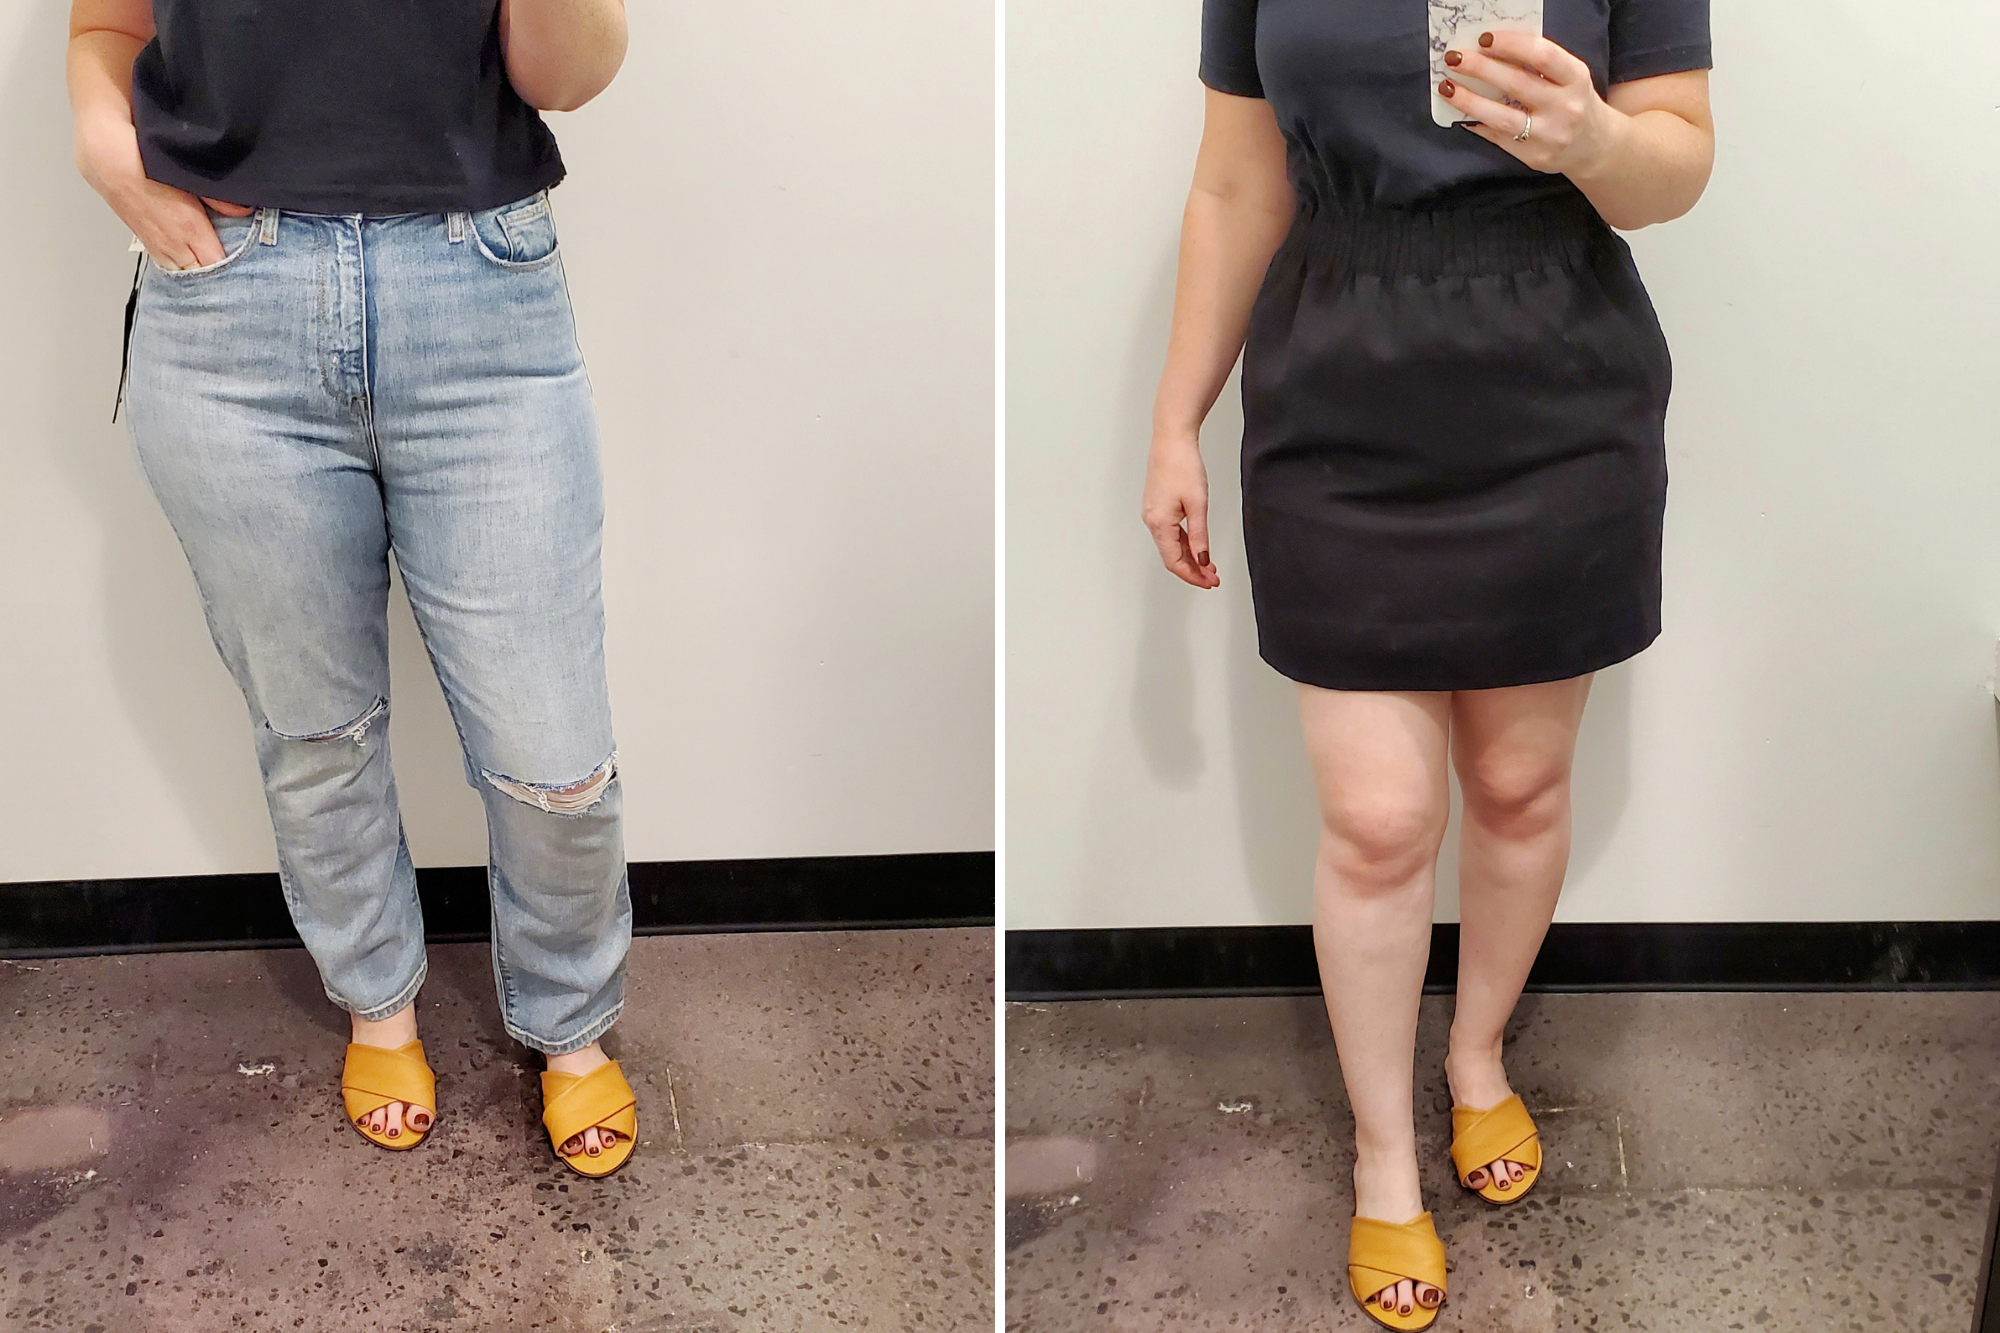 Alyssa is in a fitting room. In the left photo she is wearing a black tee, light blue denim, and orange-brown sandals. In the right photo she is wearing the same tee and sandals but with a black wool skirt. The pictures only show the waist-down.